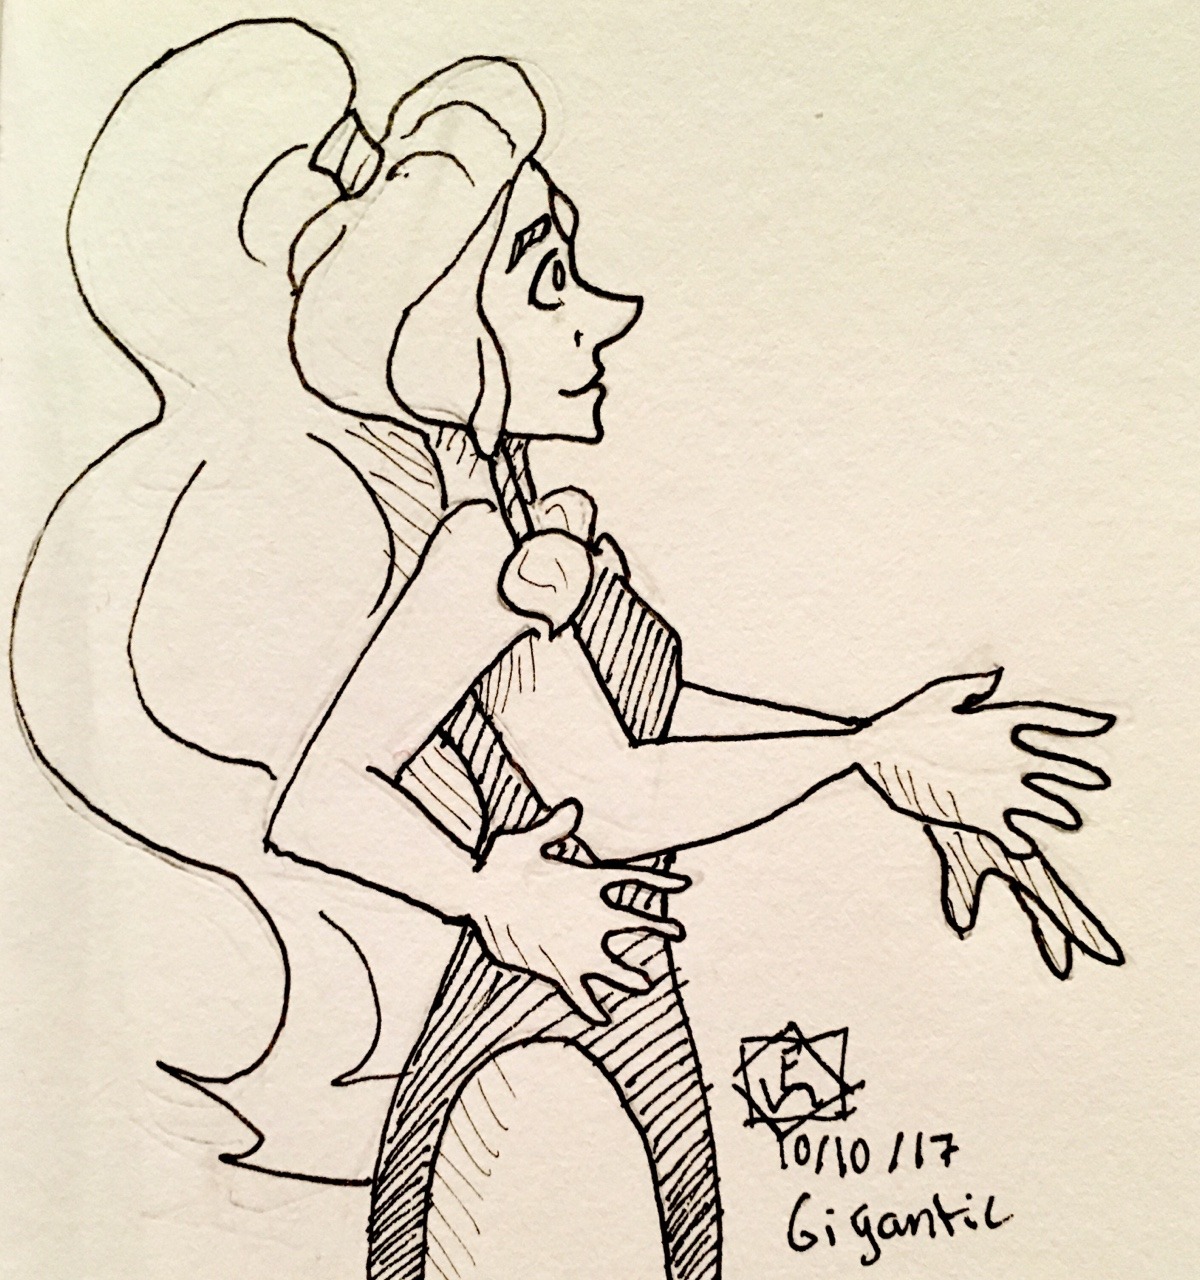 Opal as a giant woman for Inktober day 10: Gigantic!